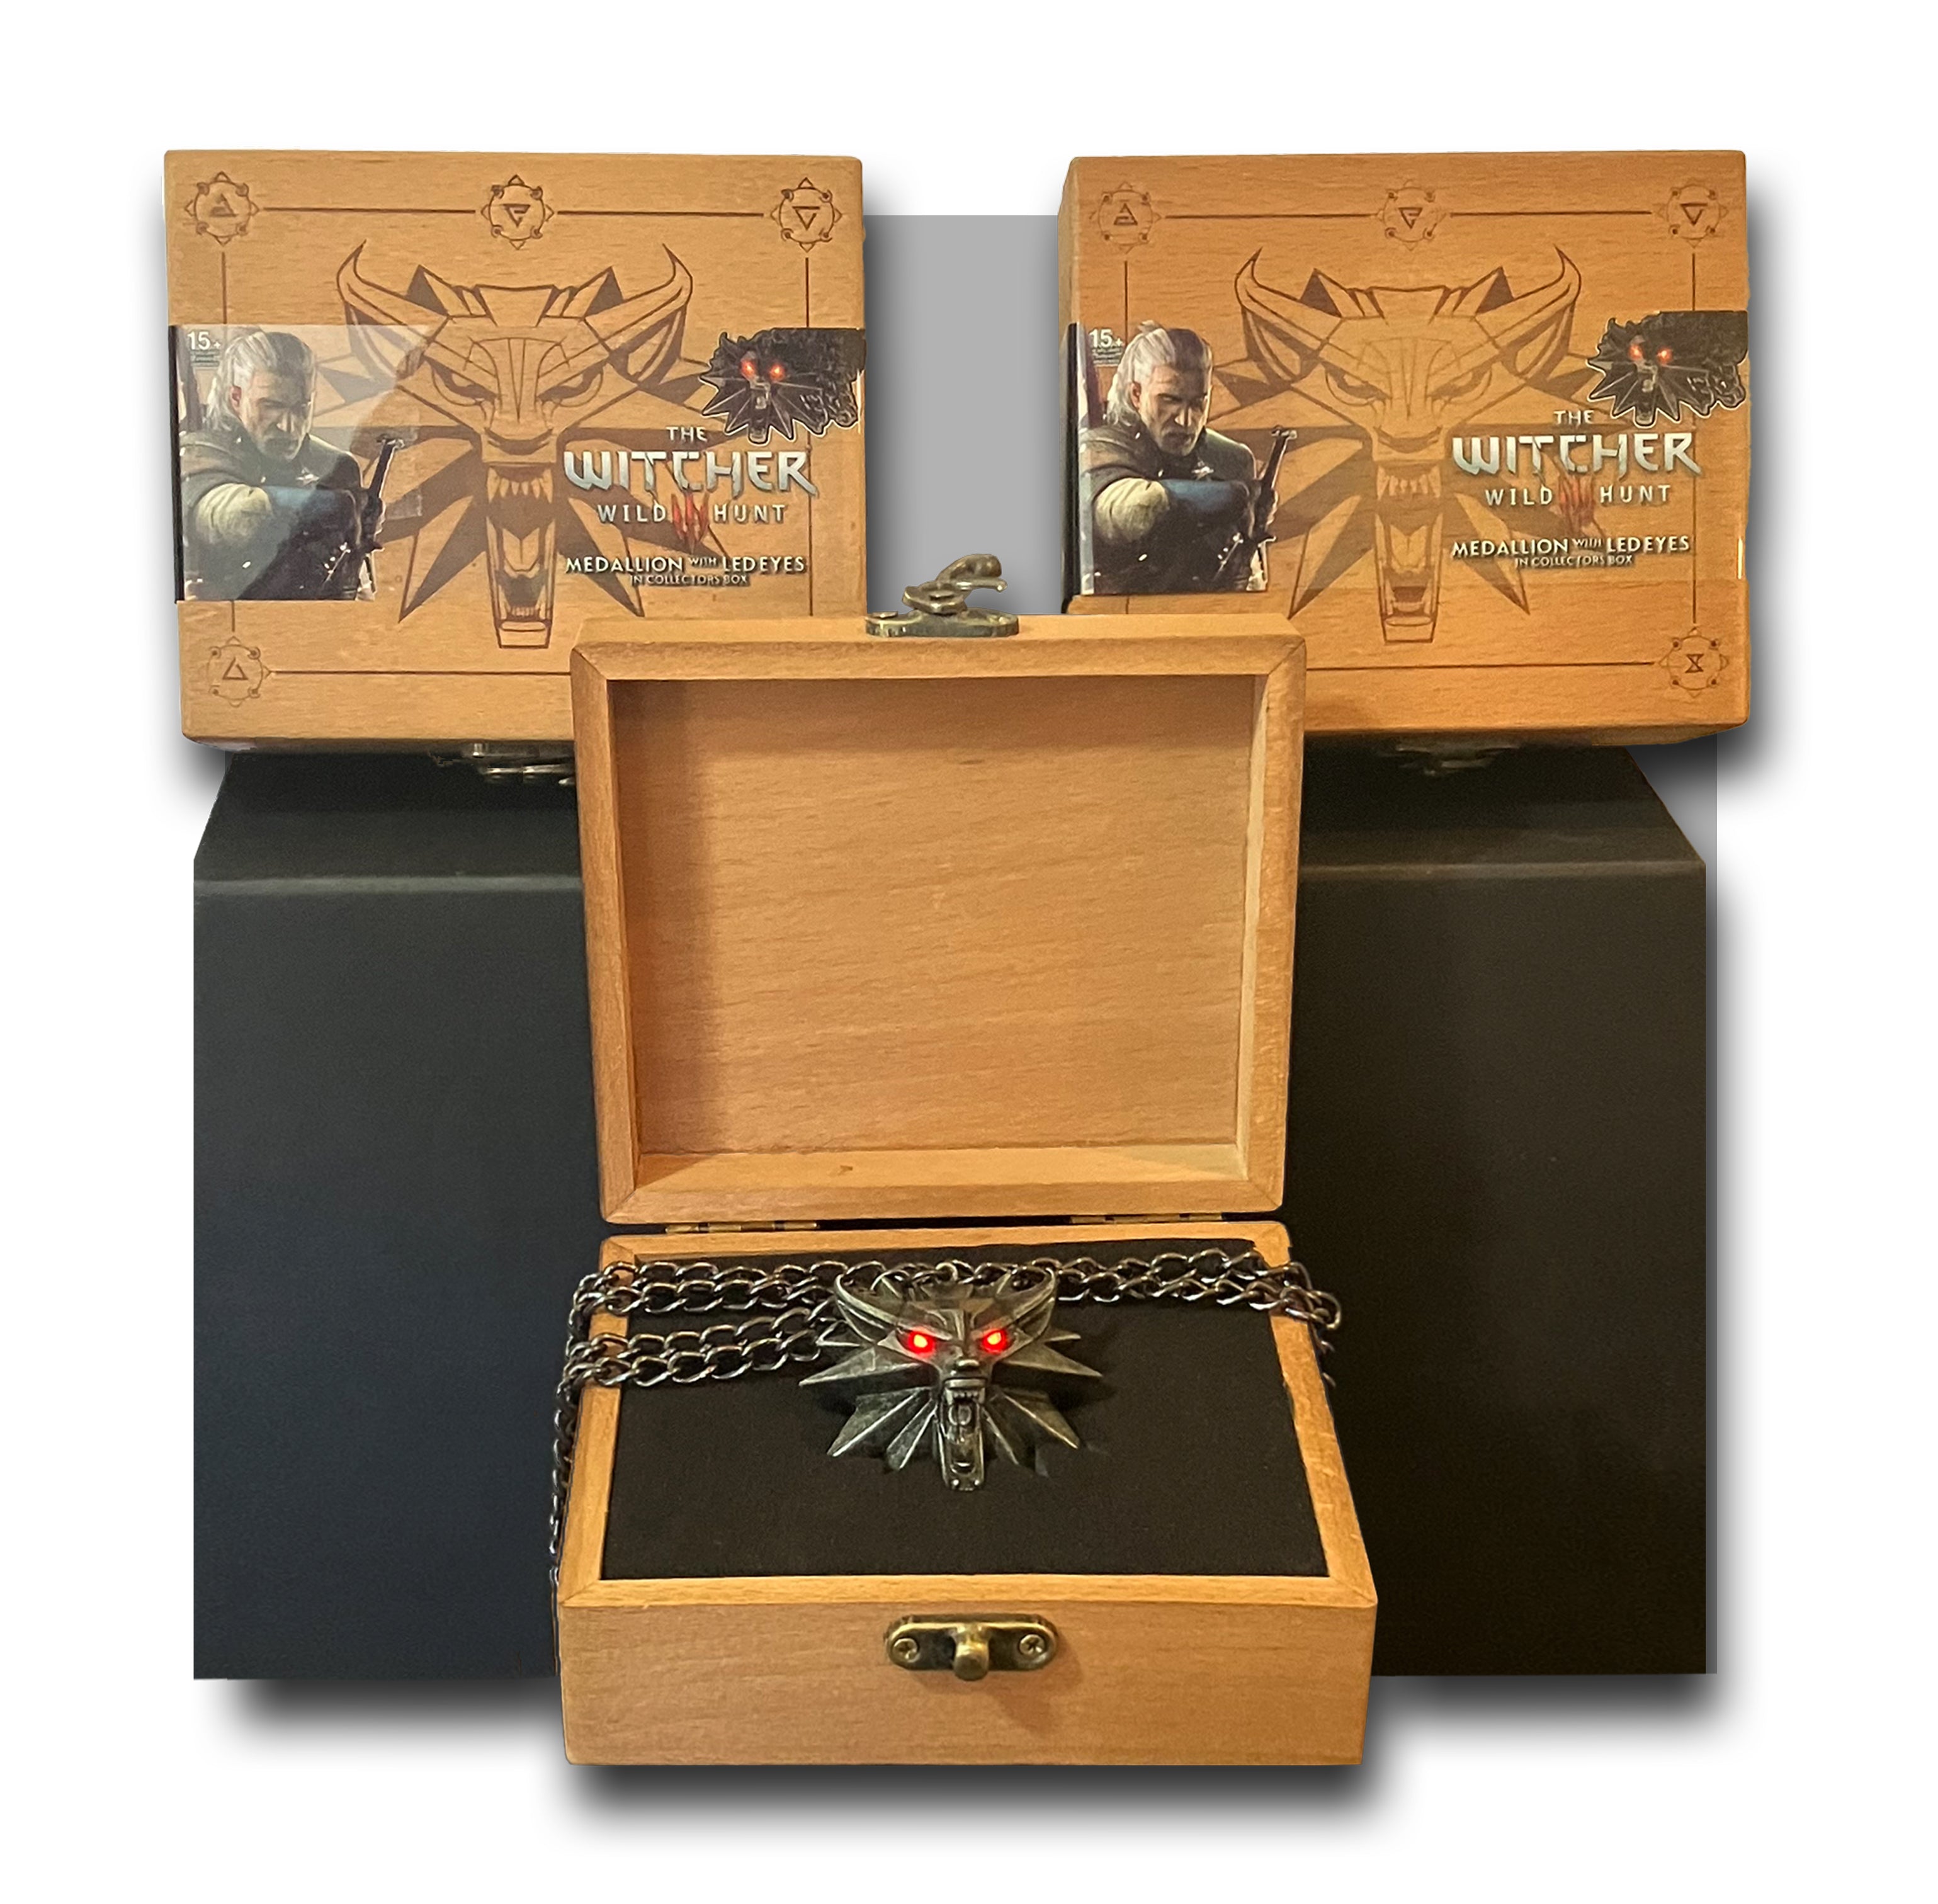 The Witcher White Wolf wooden gift box with glowing eyes wolf pendant